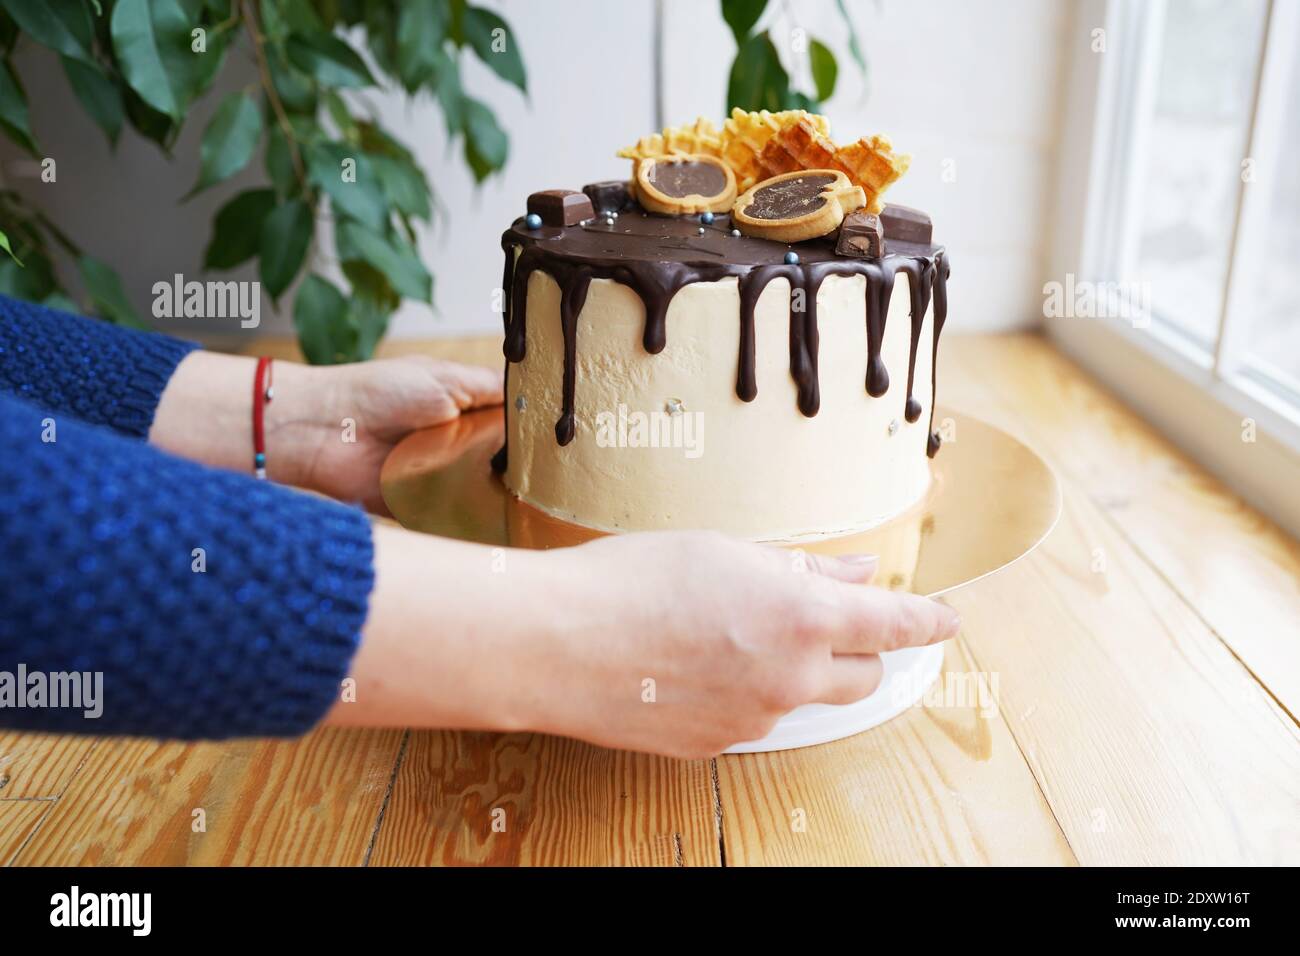 Woman's hands putting a caramel cake decorated with chocolate and waffles on wooden table near the window. Stock Photo